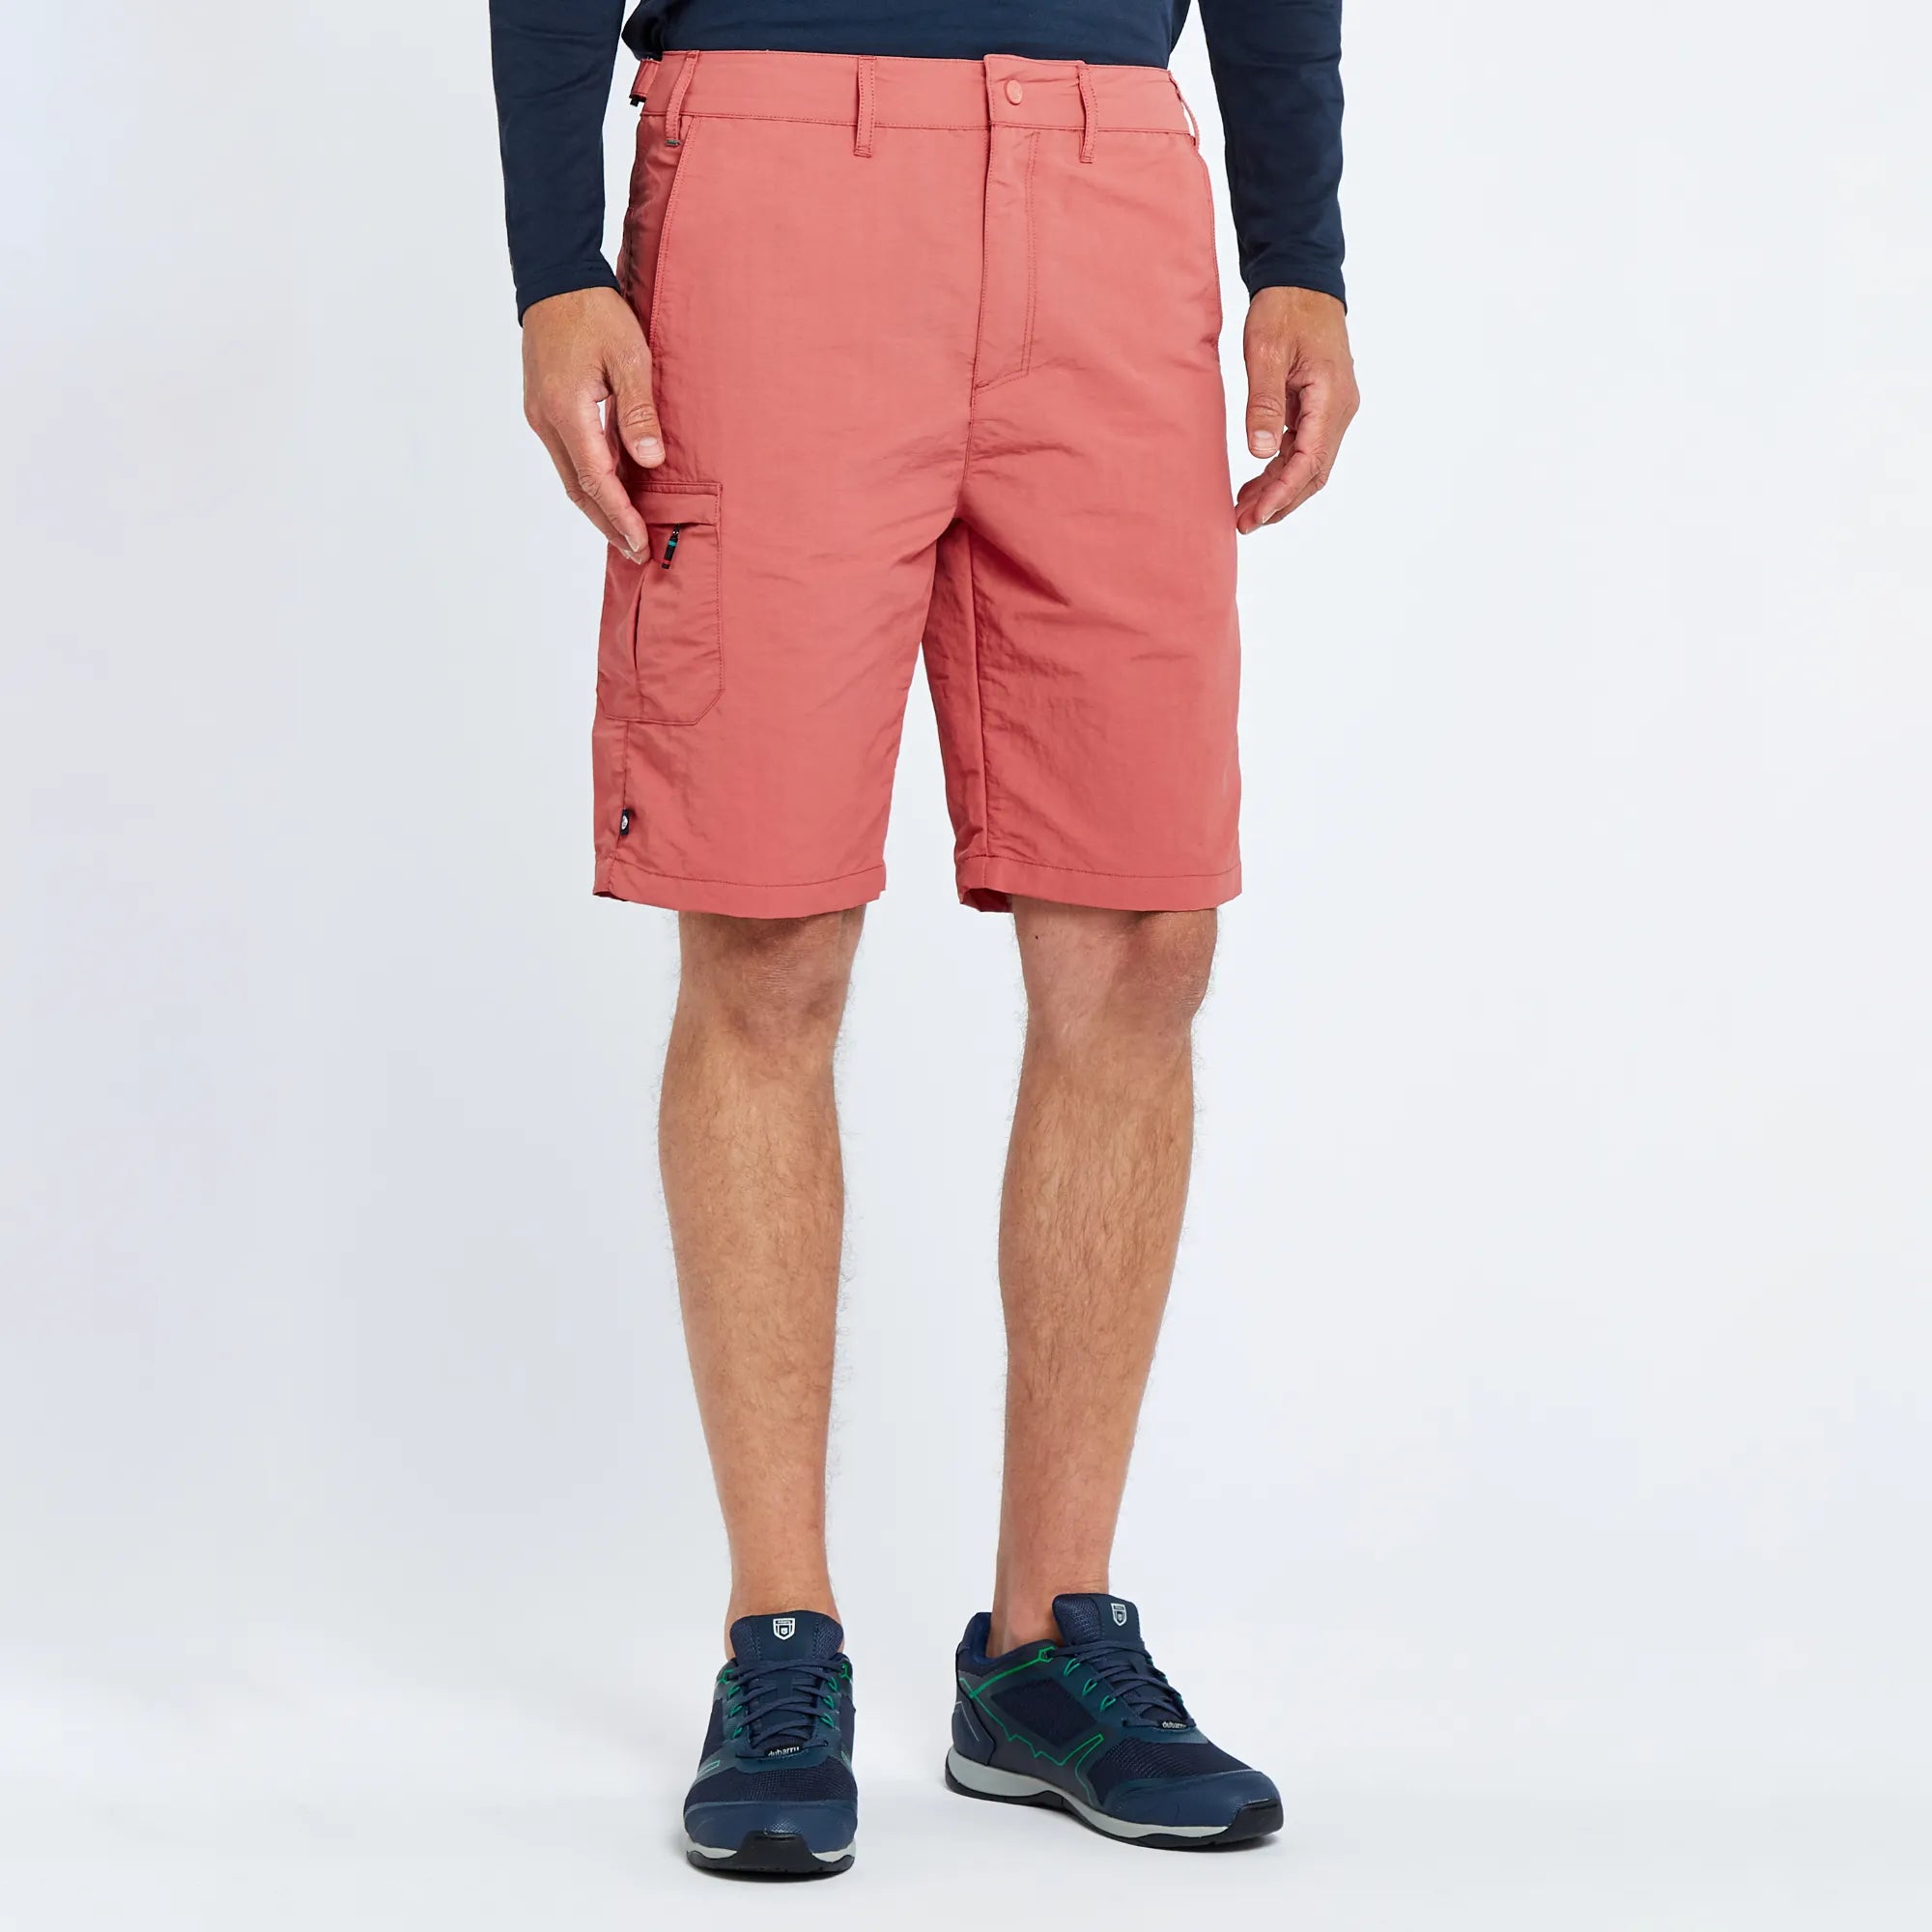 Cyprus Shorts - Imperial Red